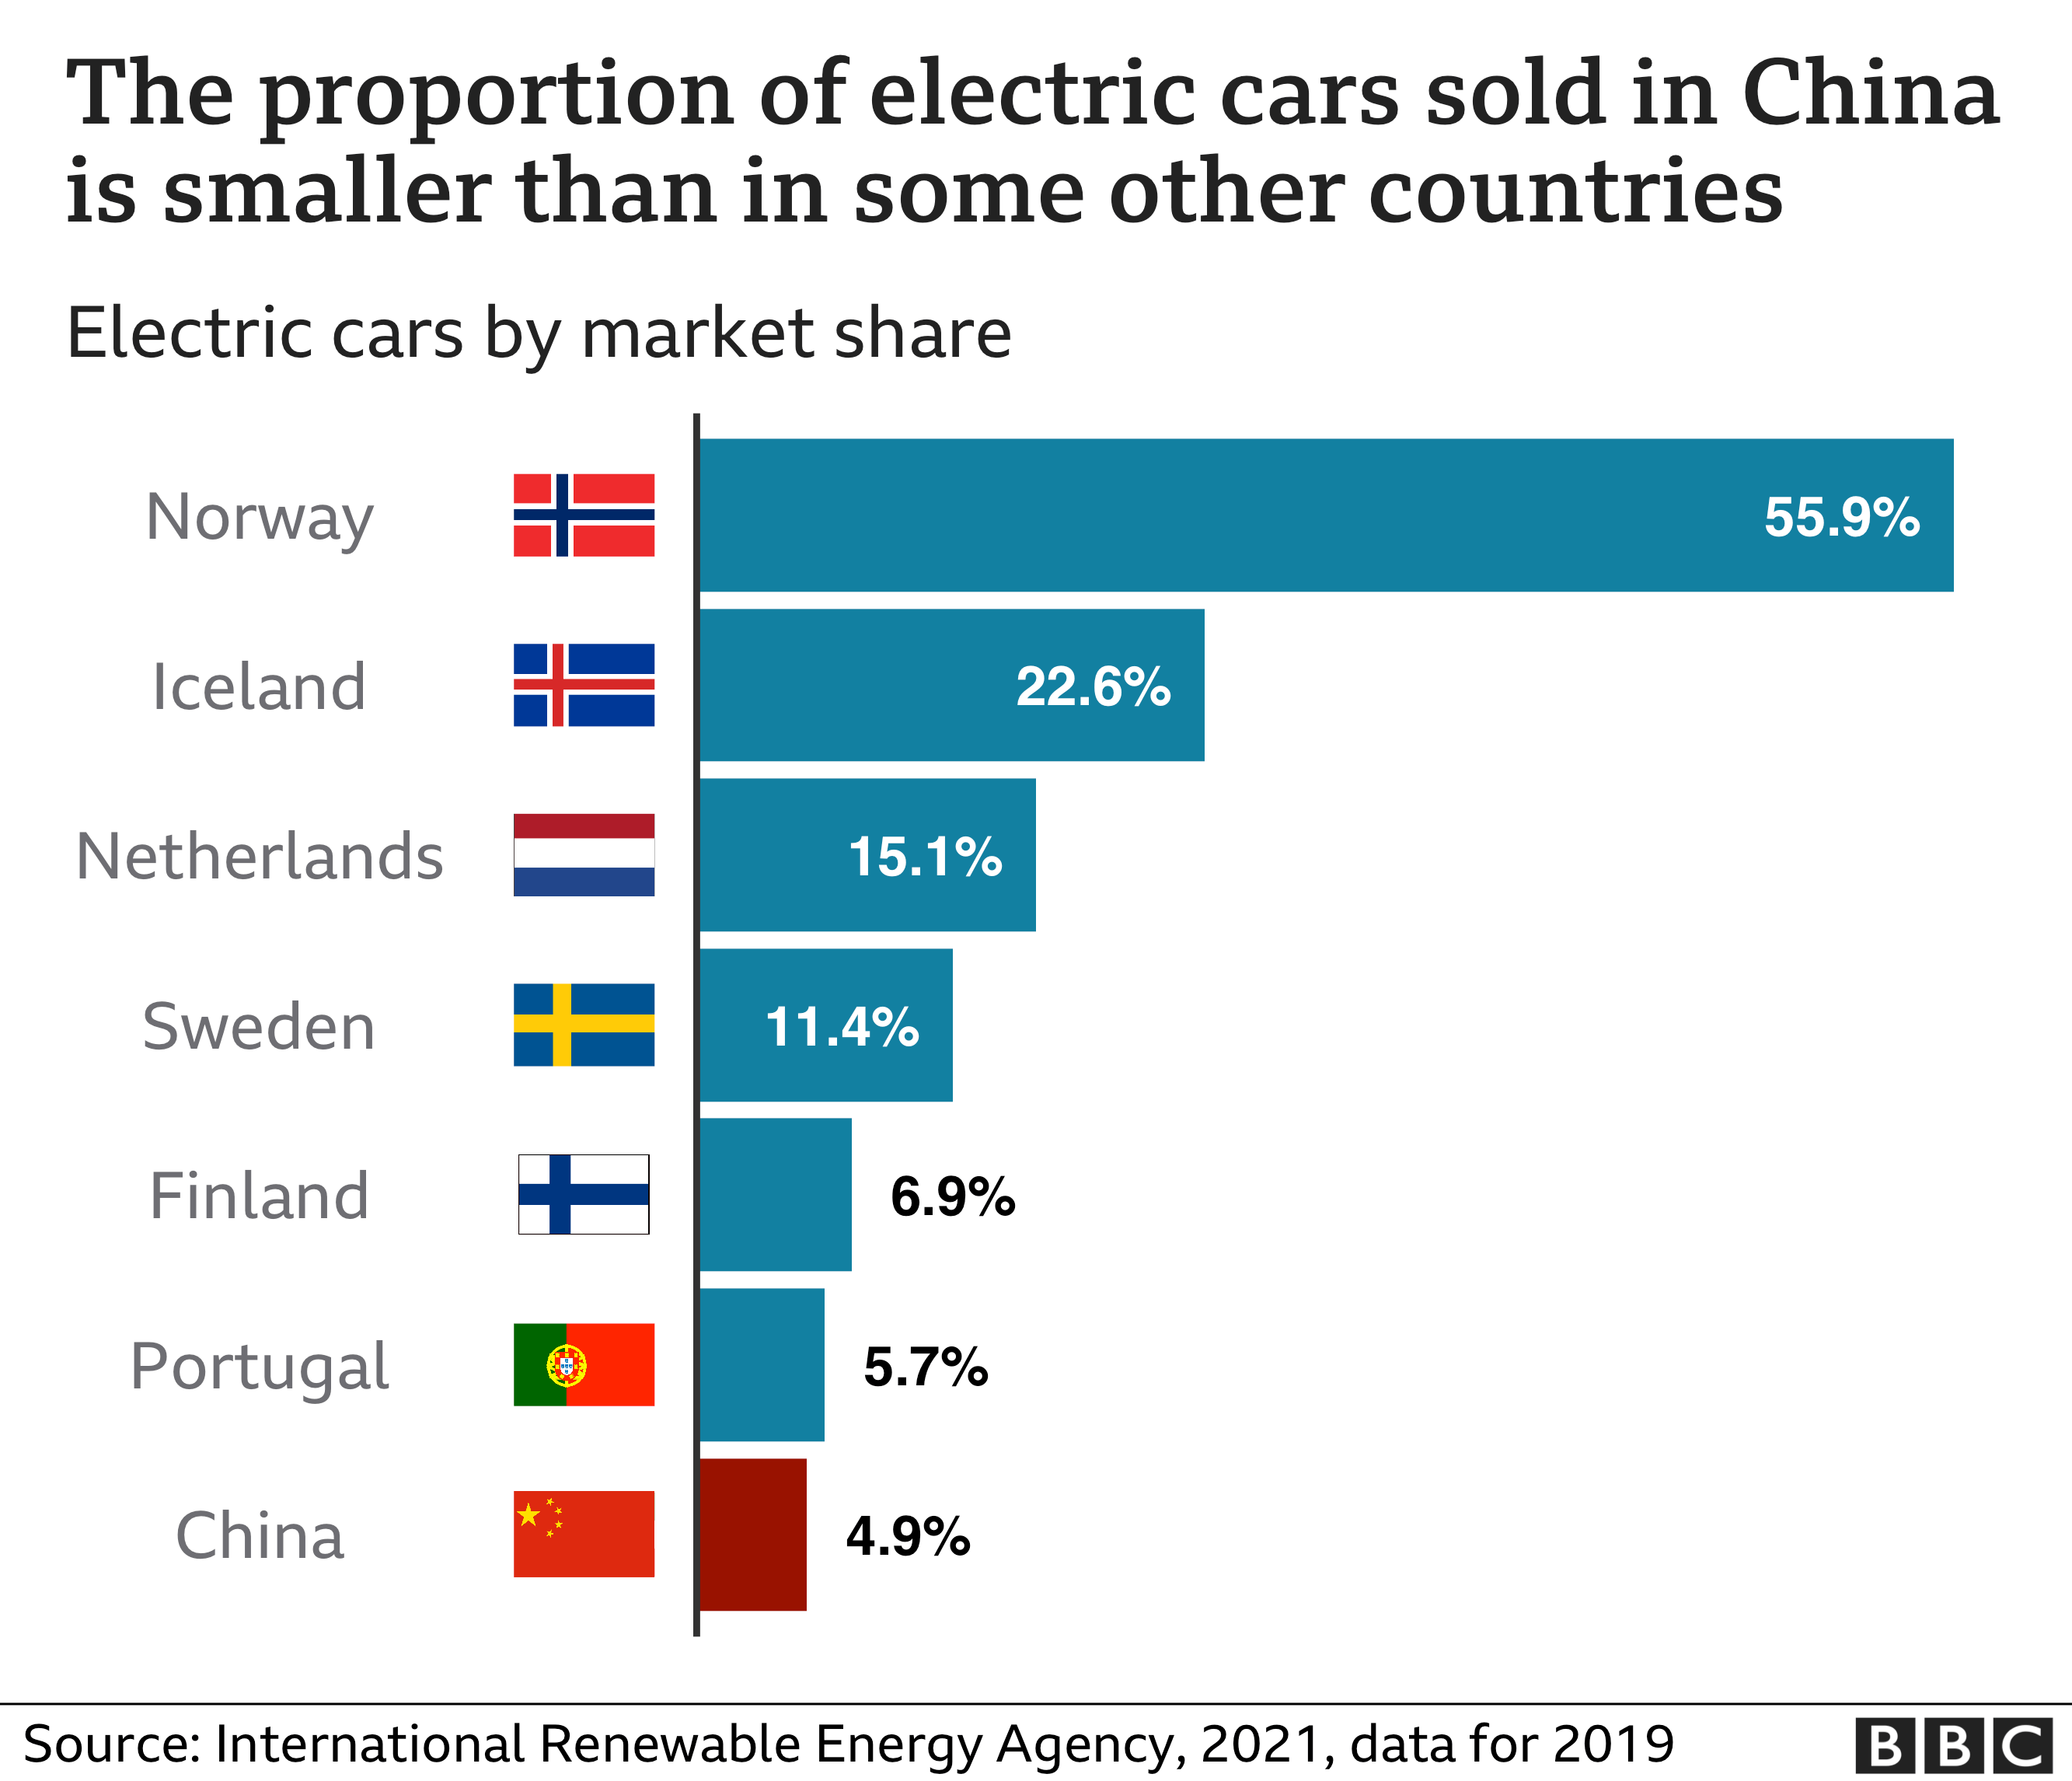 Chart showing electric cars by market share